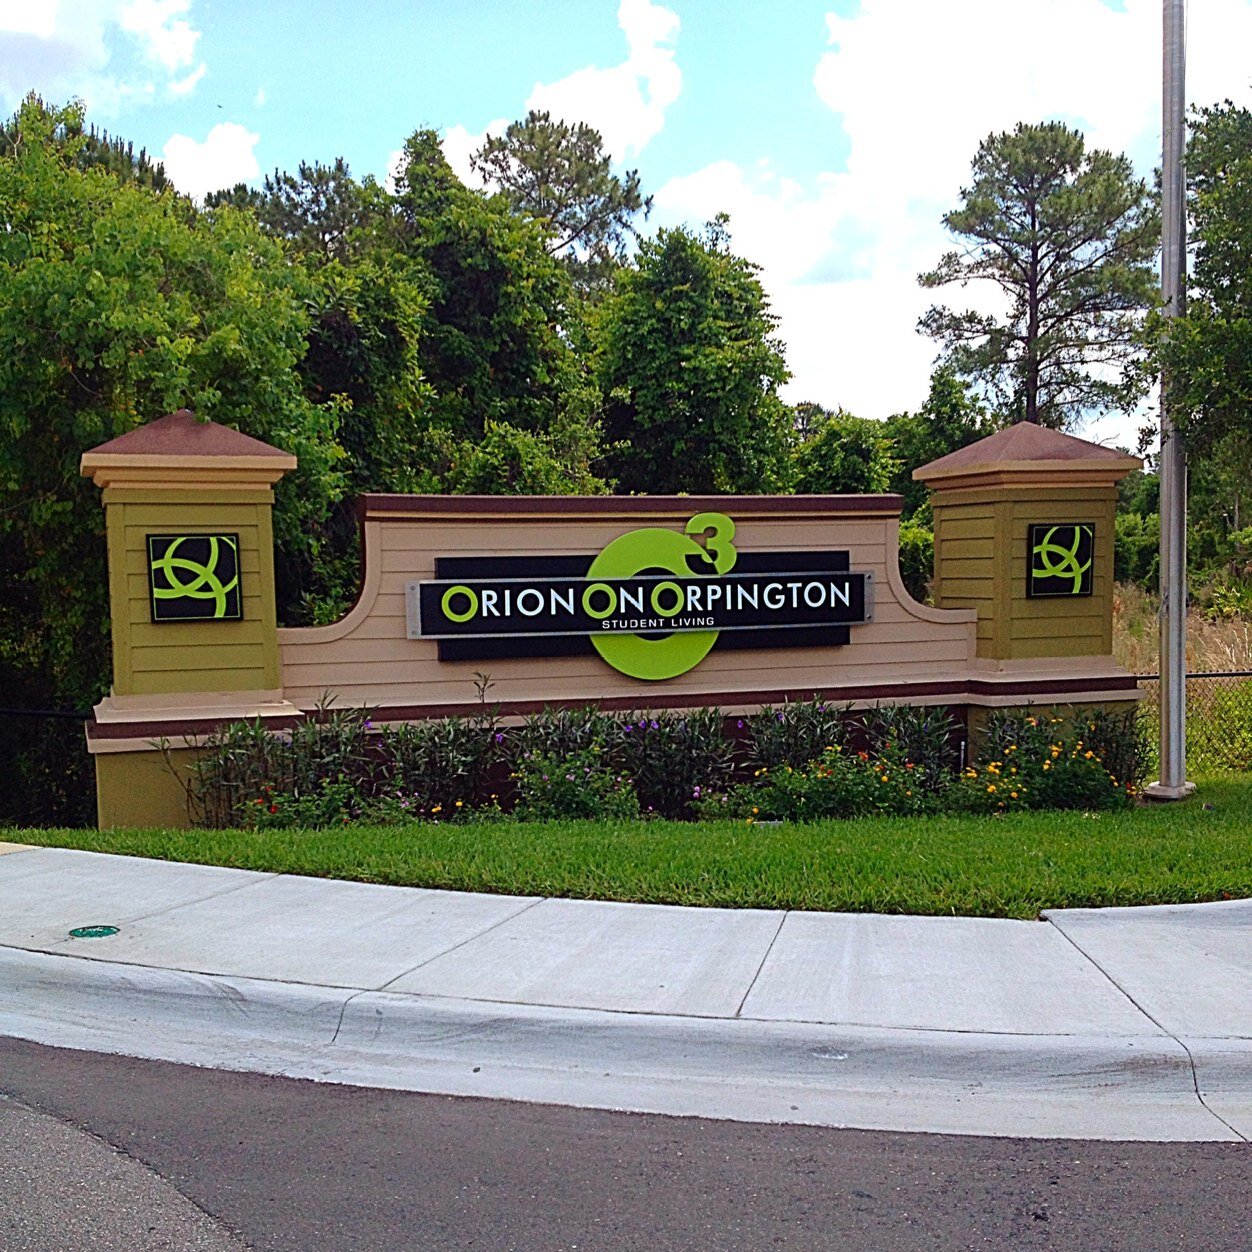 Orion on Orpington is THE premier luxury student living community near the University of Central Florida.